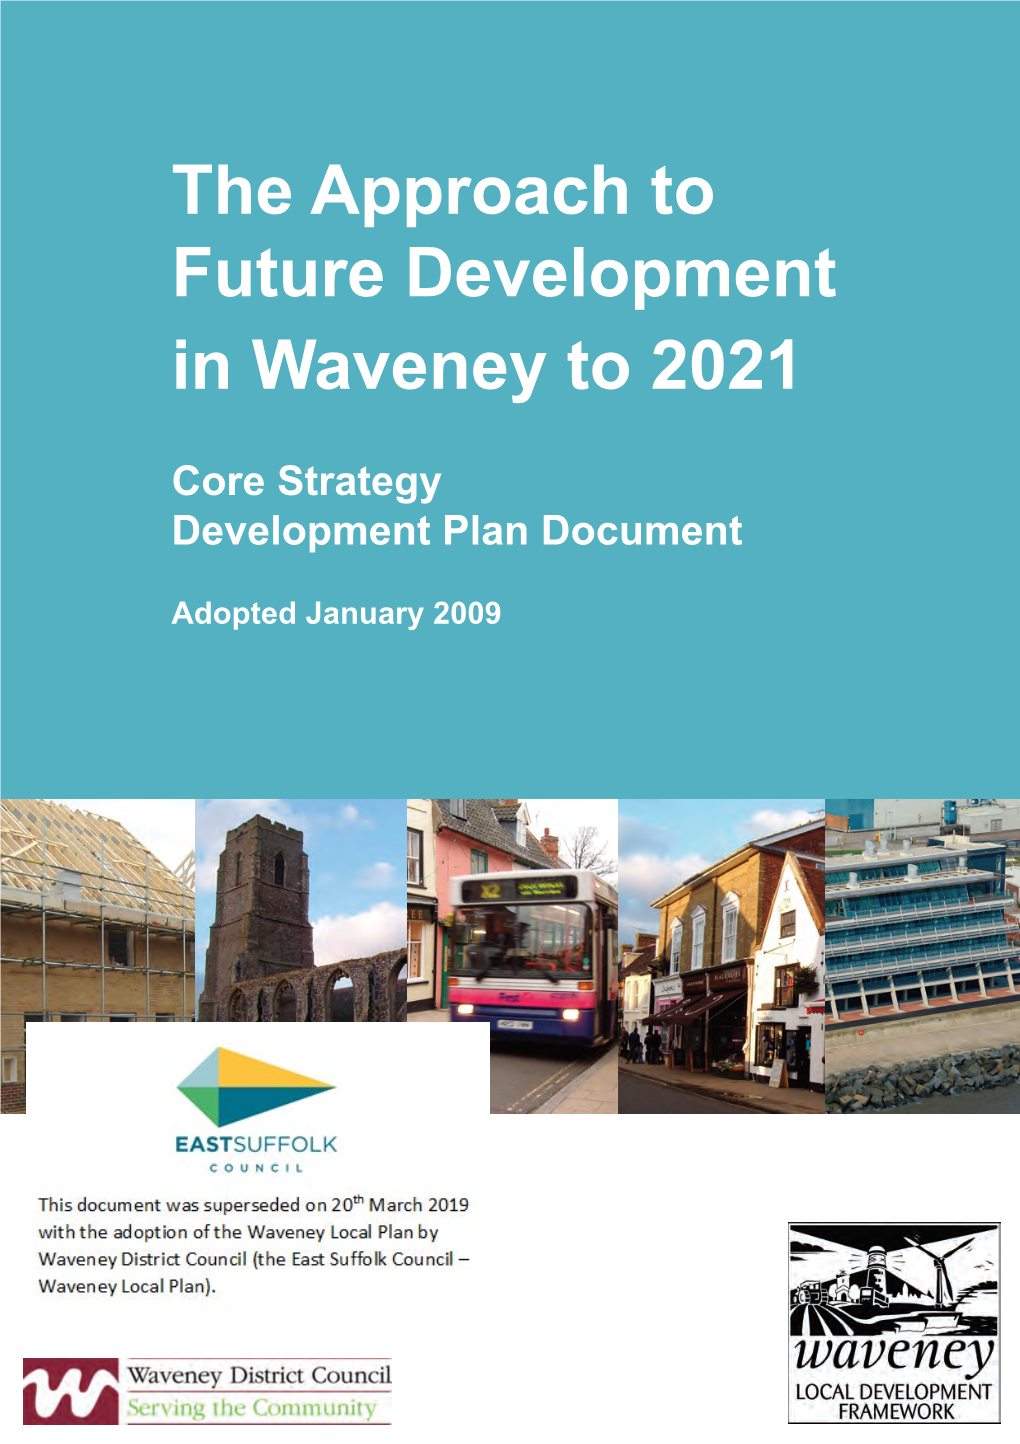 The Approach to Future Development in Waveney to 2021